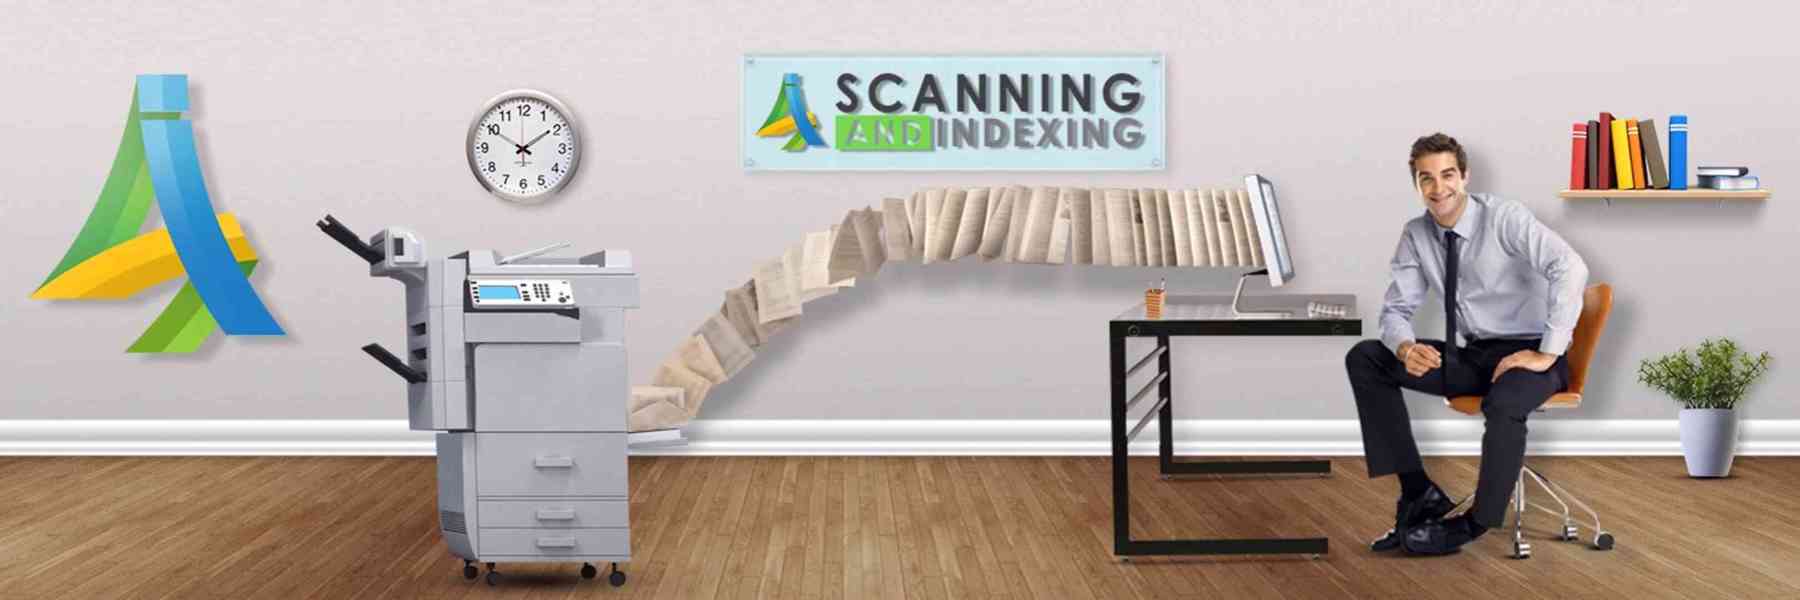 Best Document Scanning and Indexing Company - foto 1